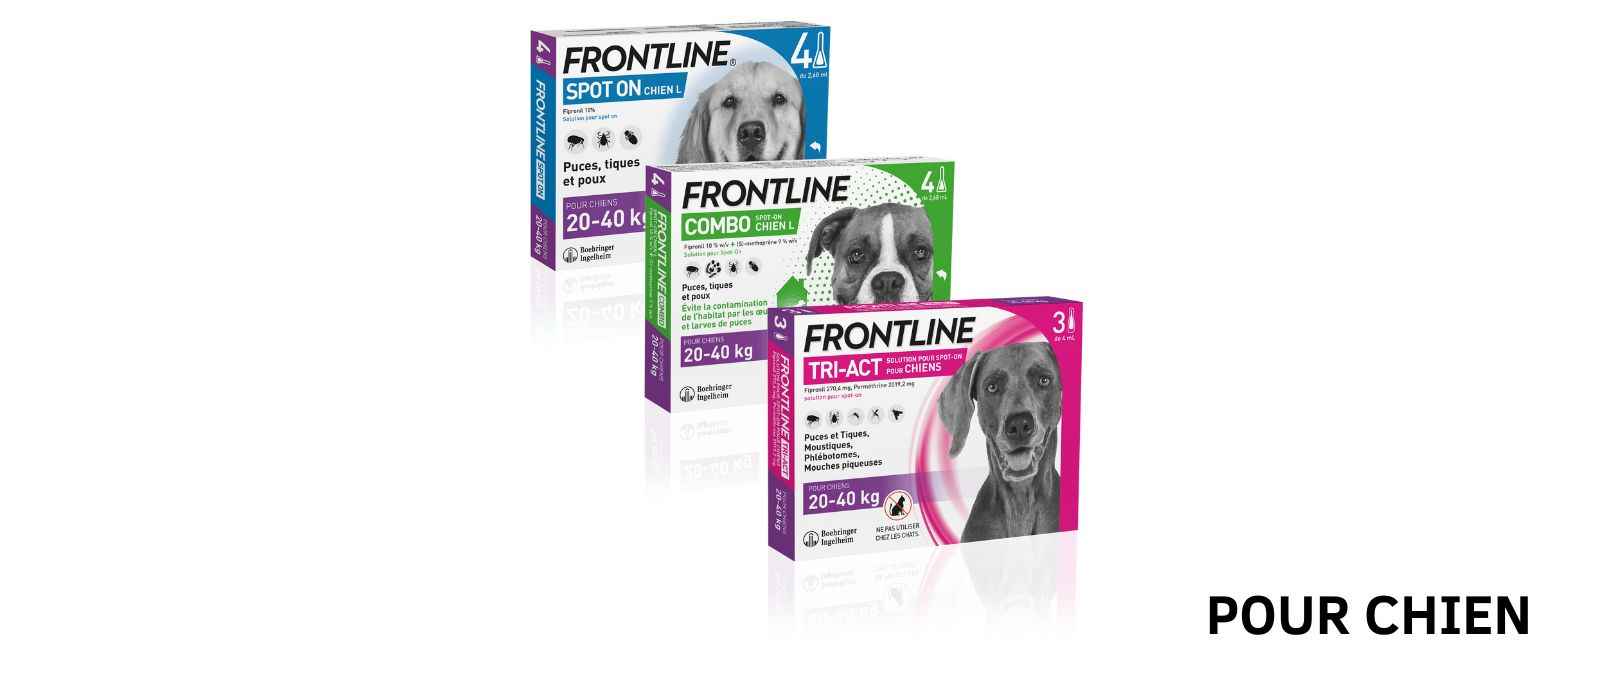 Frontline antiparasitaires pour chiens